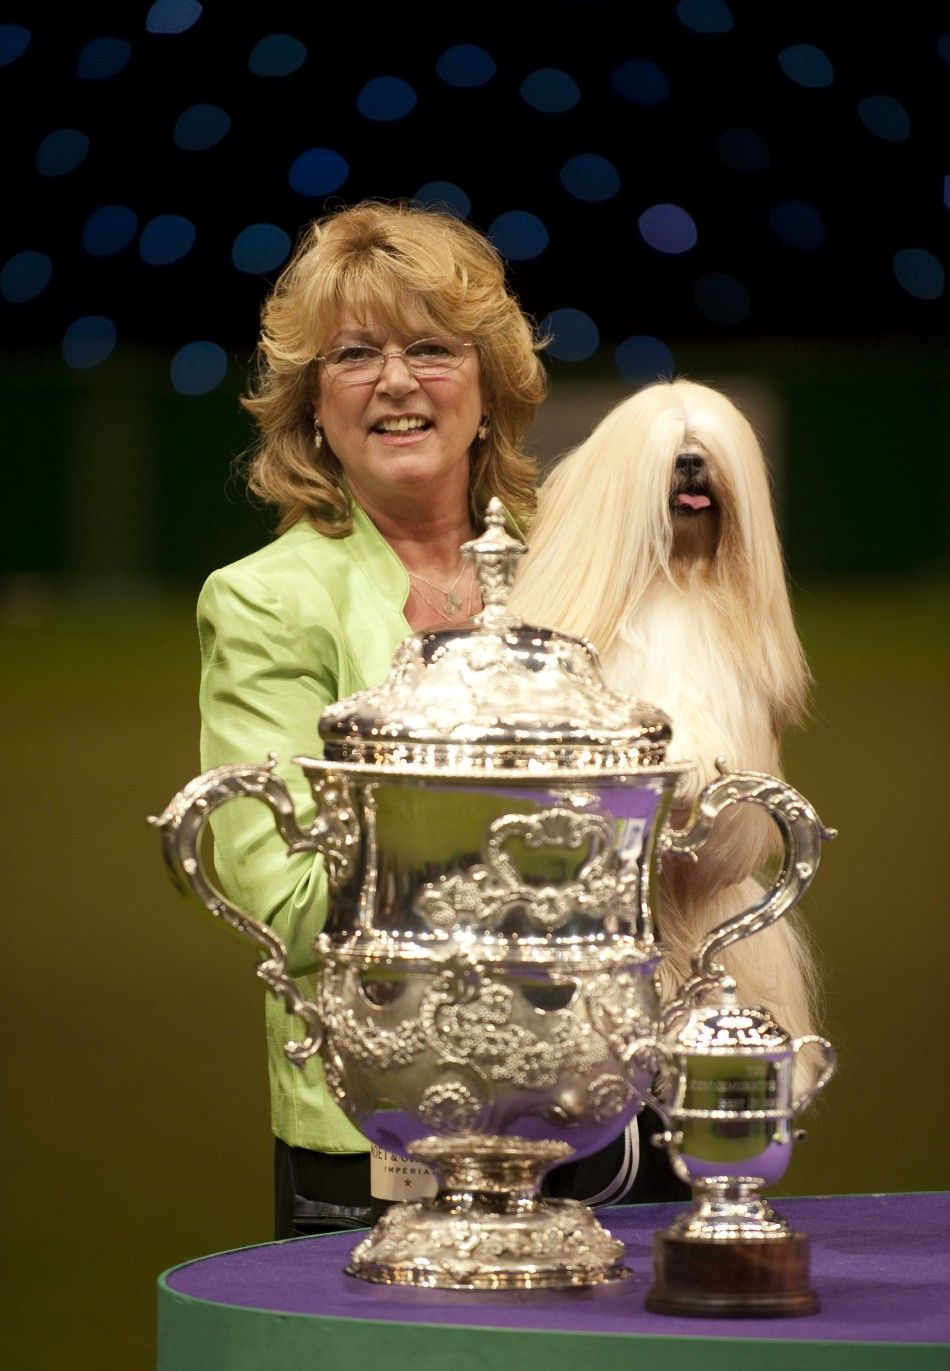  Owner Margaret Anderson celebrates with Elizabeth, a Lhasa Apso, after winning Best in Show on the final day of the Crufts dog show at the NEC arena in Birmingham